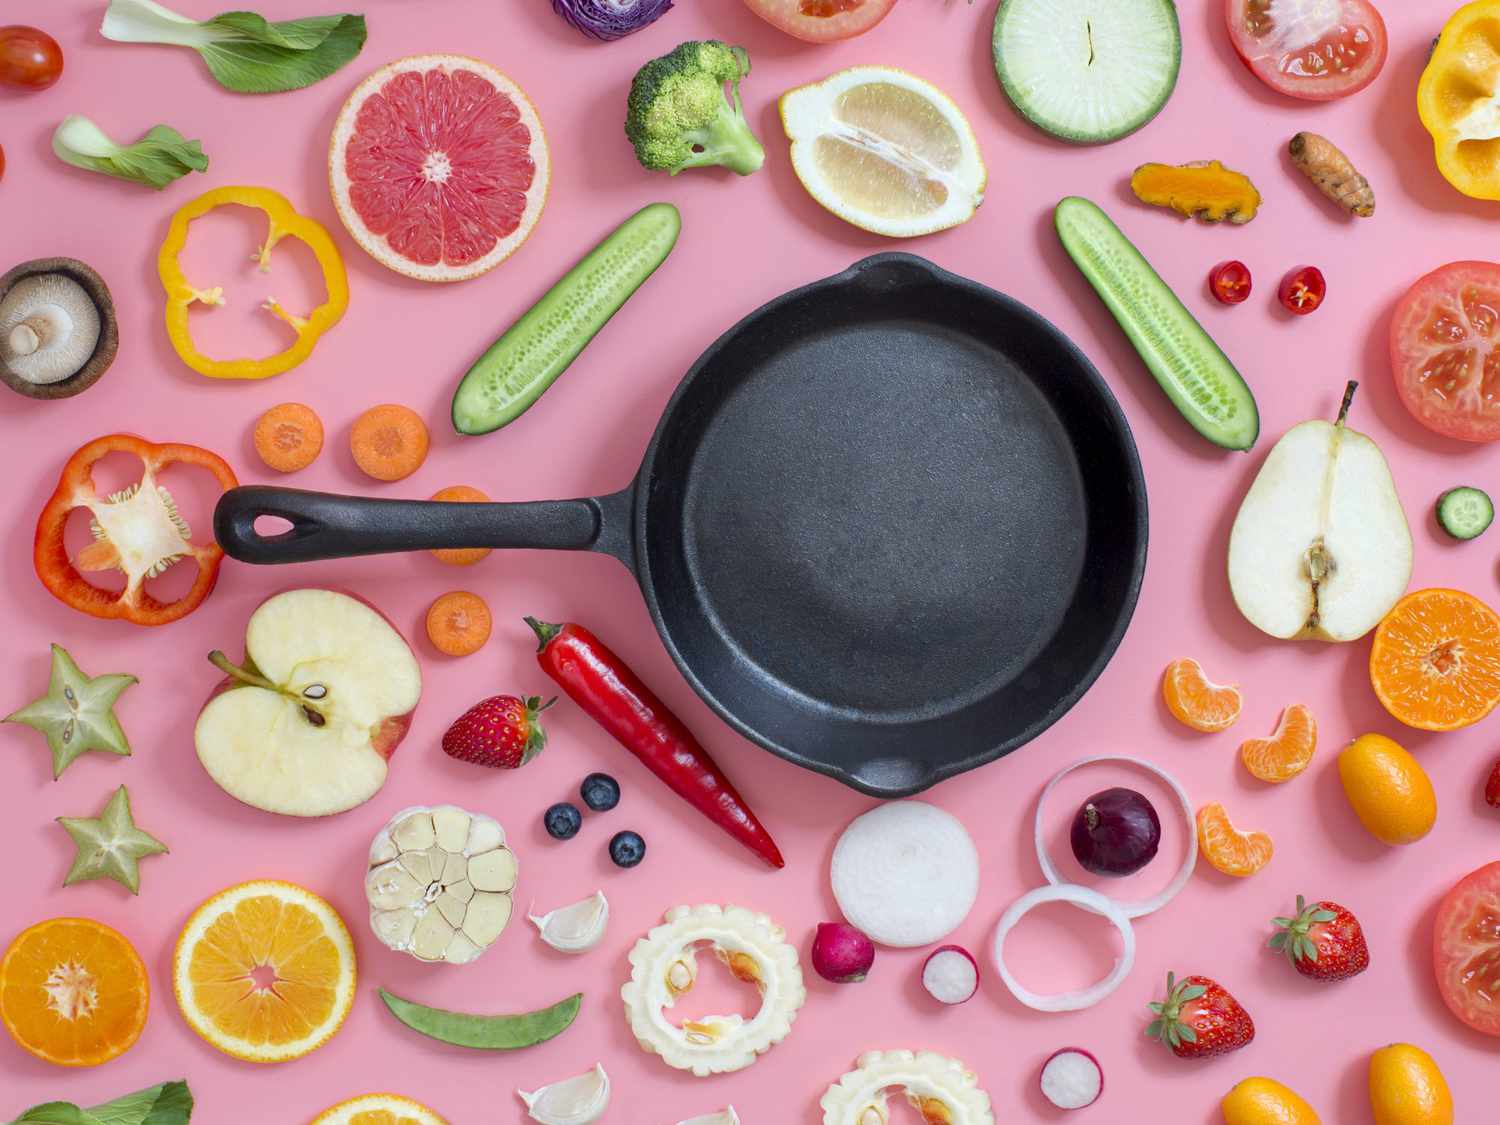 7 Biggest Cooking Mistakes Every Home Chef Makes—and How to Fix Them